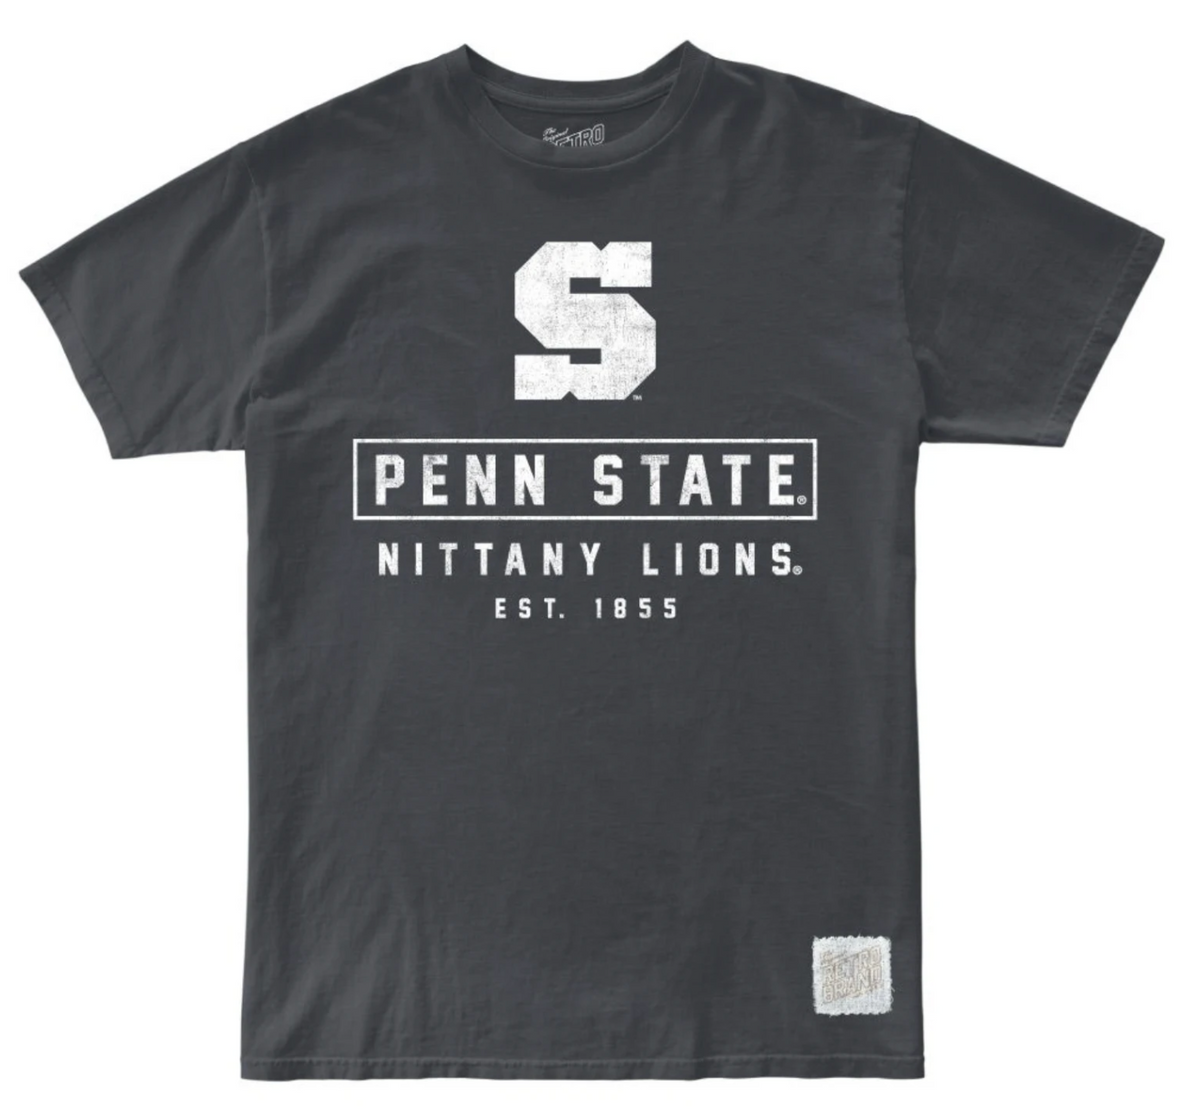 Penn State Nittany Lions 100% Cotton Tee